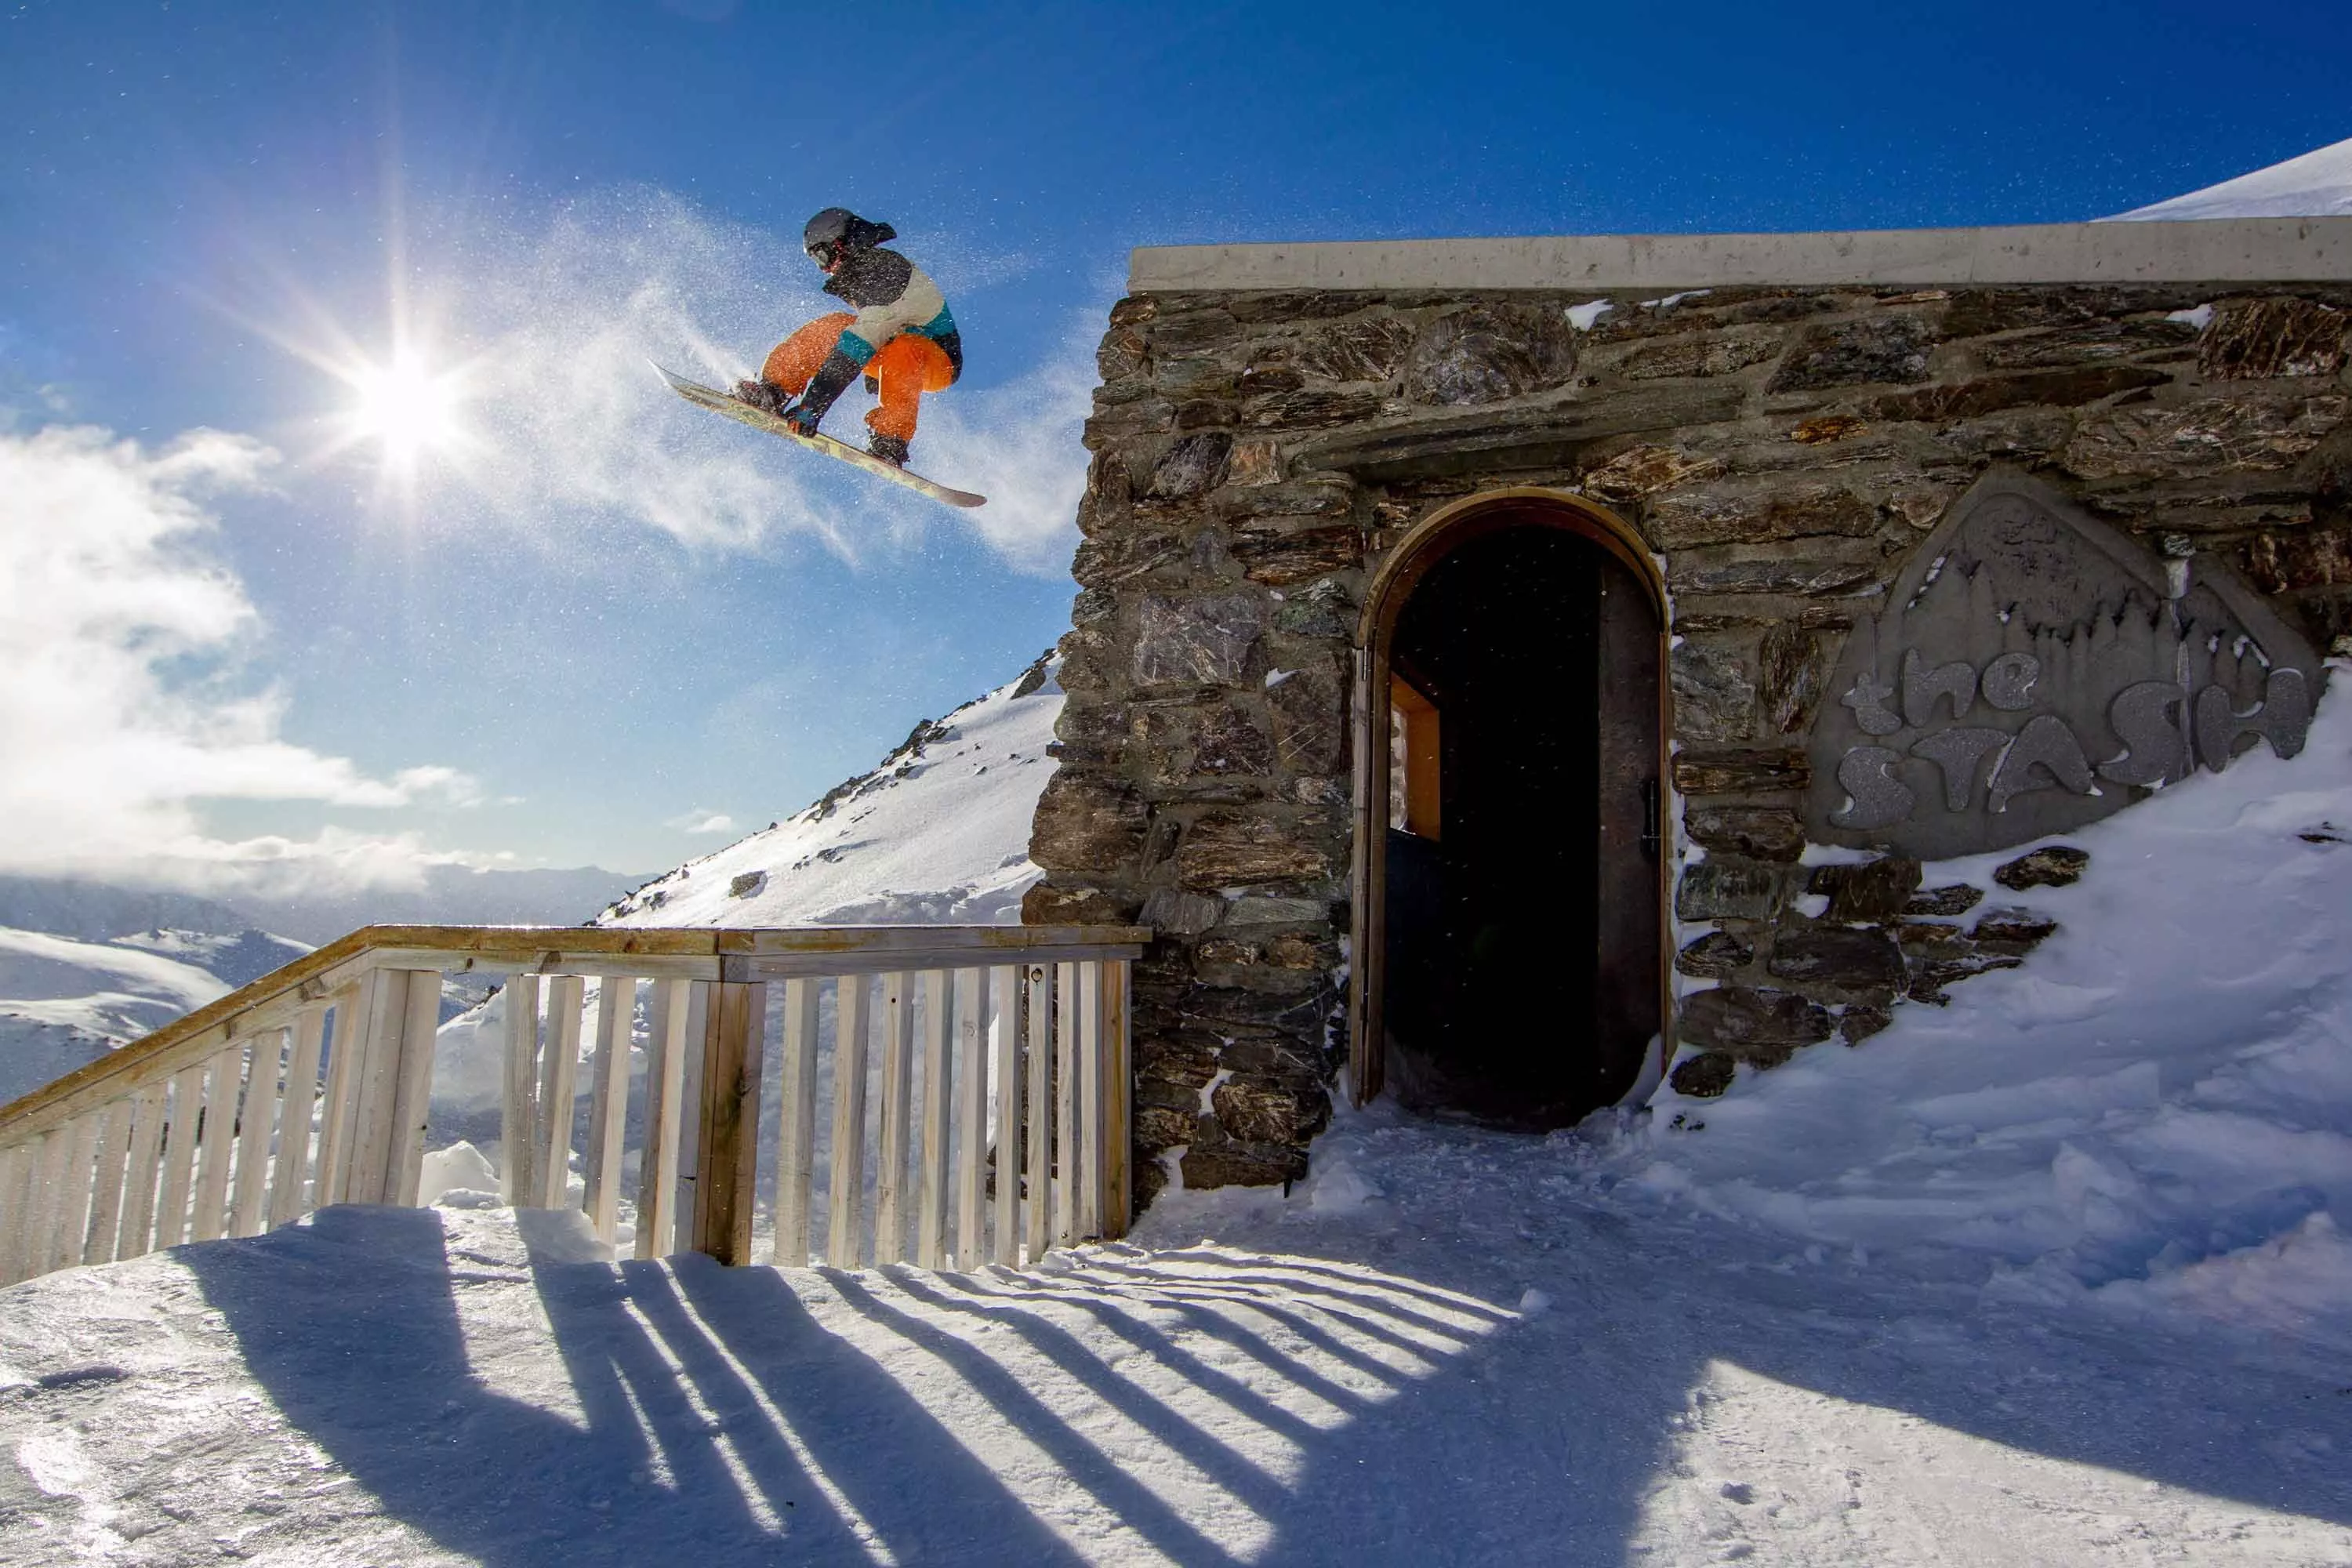 The Remarkables in New Zealand, Australia and Oceania | Snowboarding,Skiing - Rated 4.2